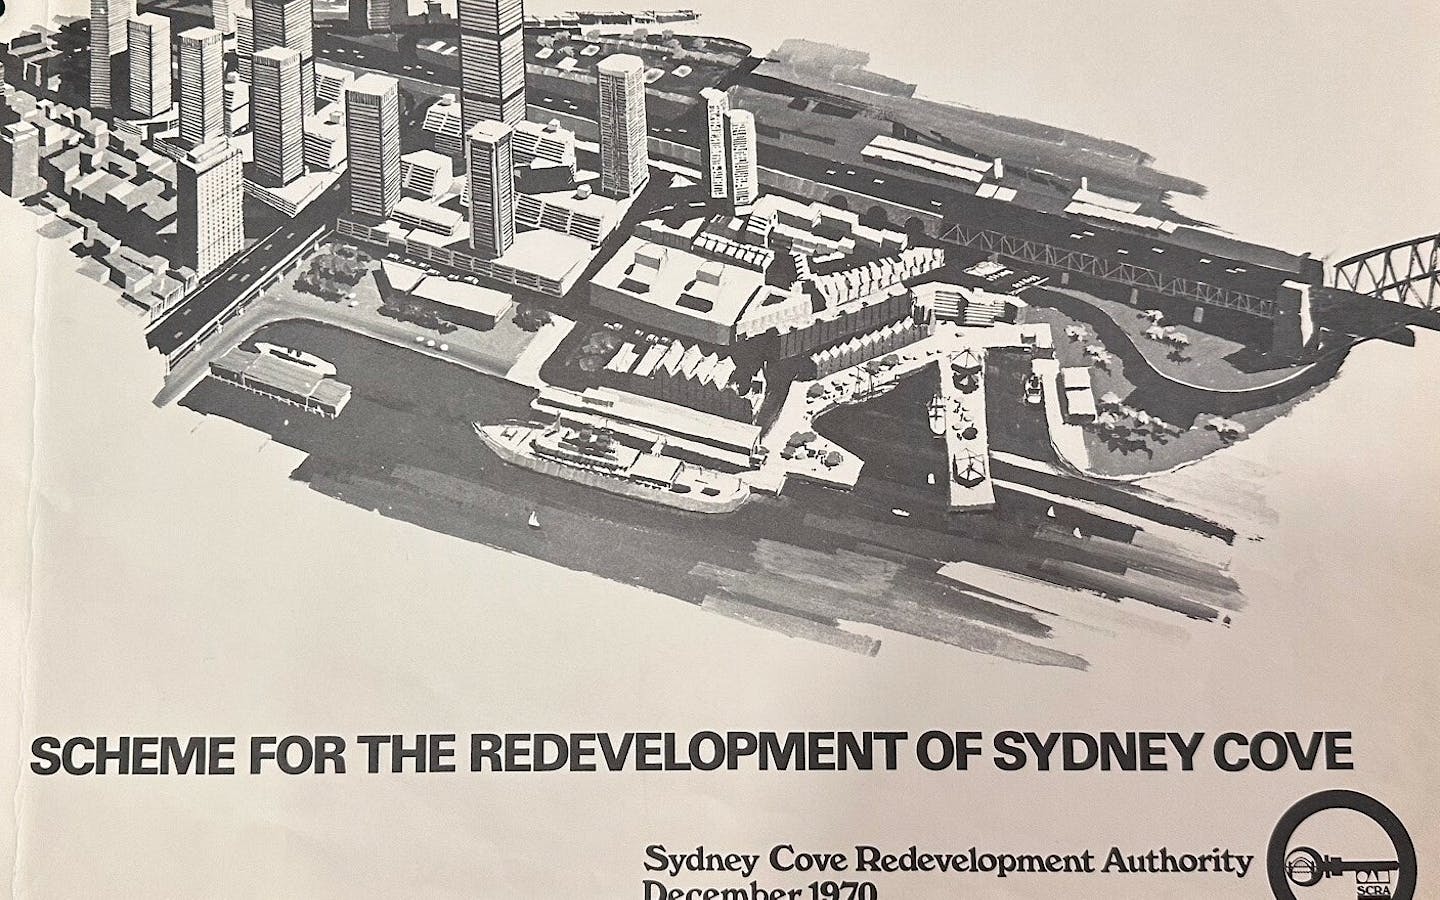 Scheme for the Redevelopment of Sydney Cove